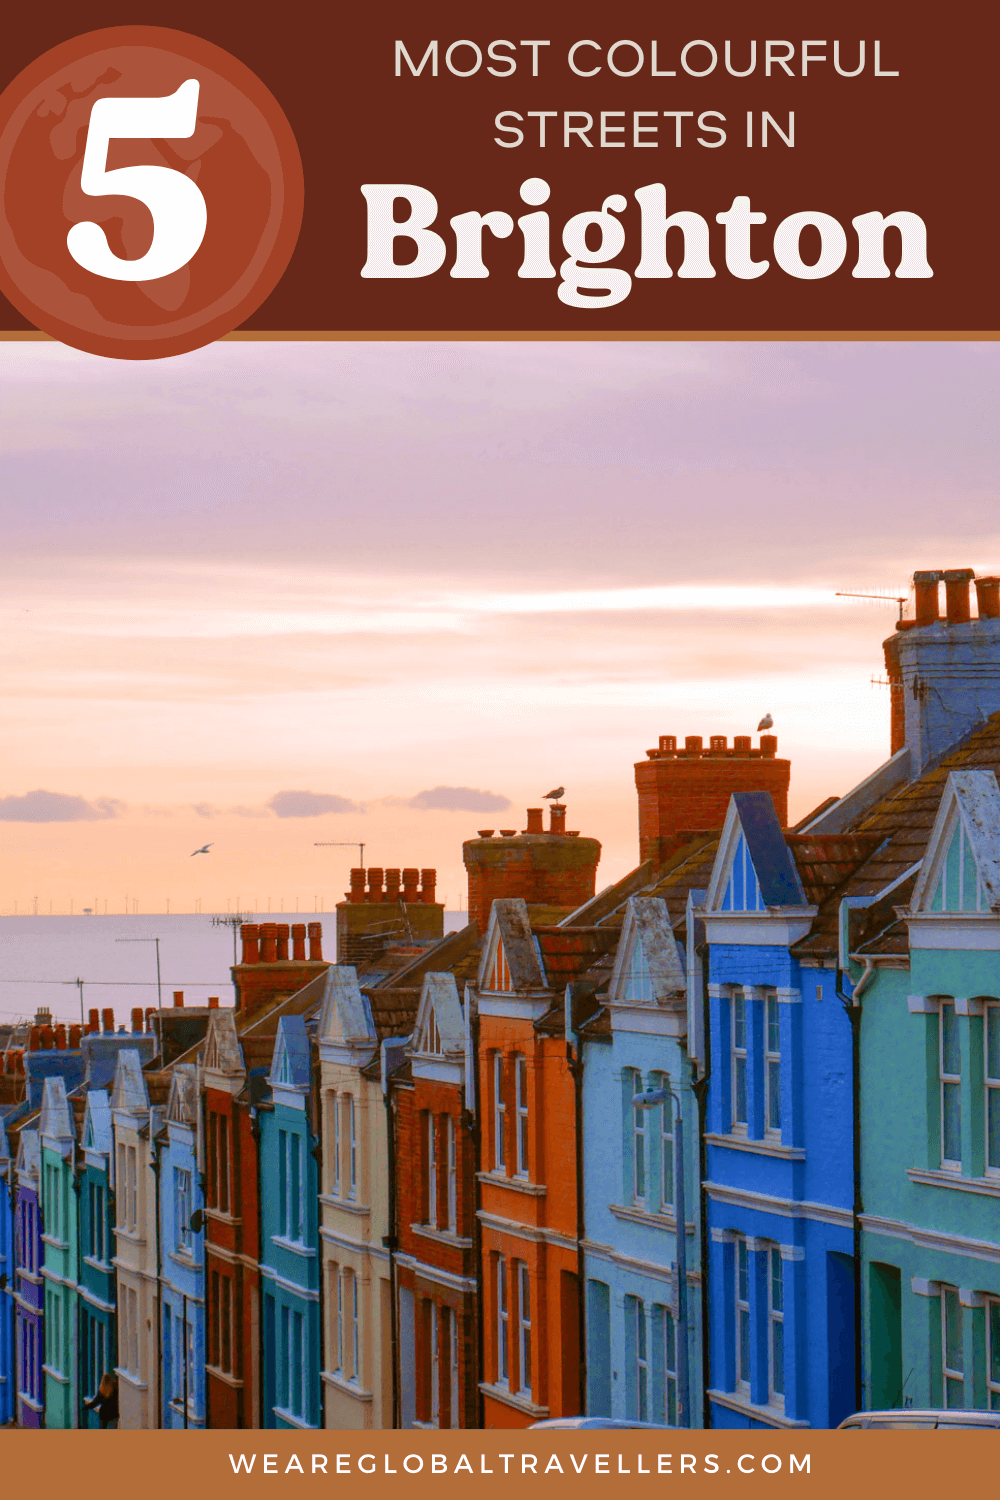 The most colourful streets in Brighton, England